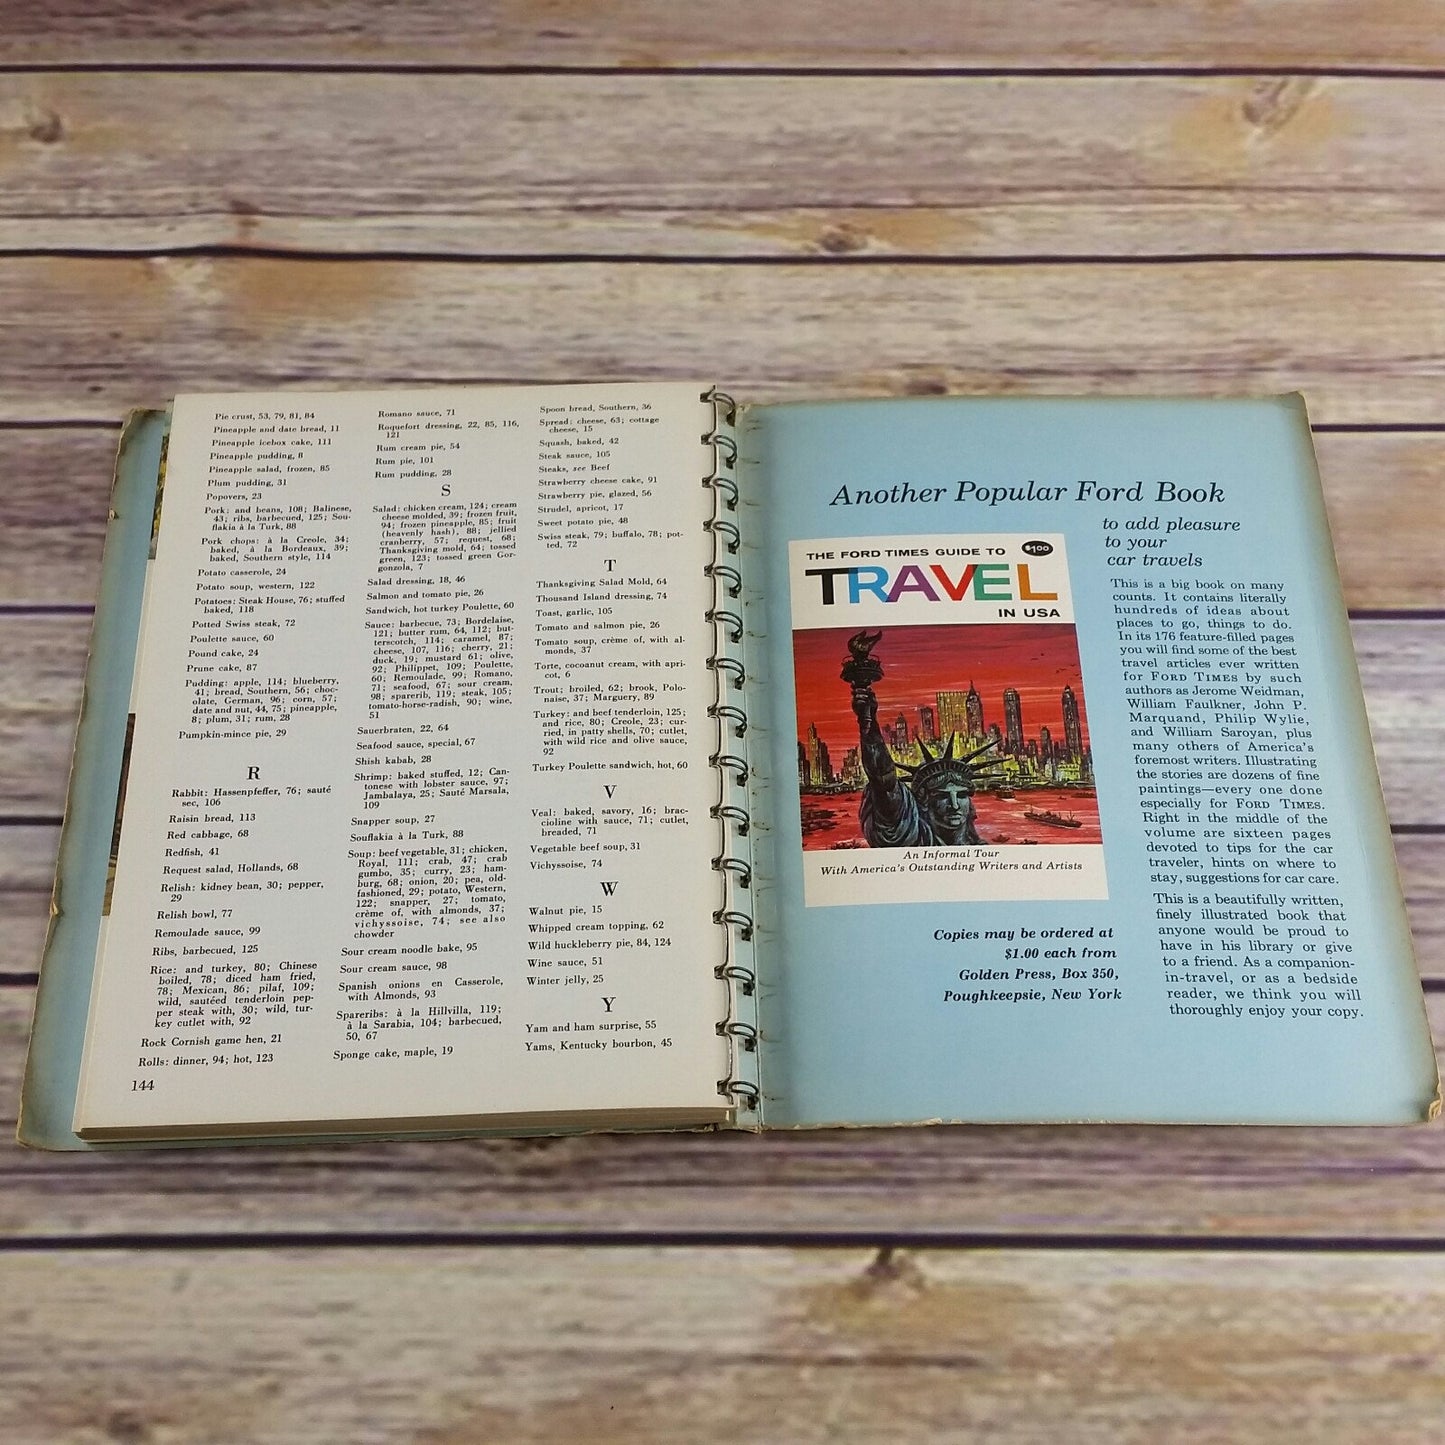 Vintage New Ford Treasury of Favorite Recipes from Famous Restaurants Recipes 1963 Spiral Bound Travelers Guide to Eating Places